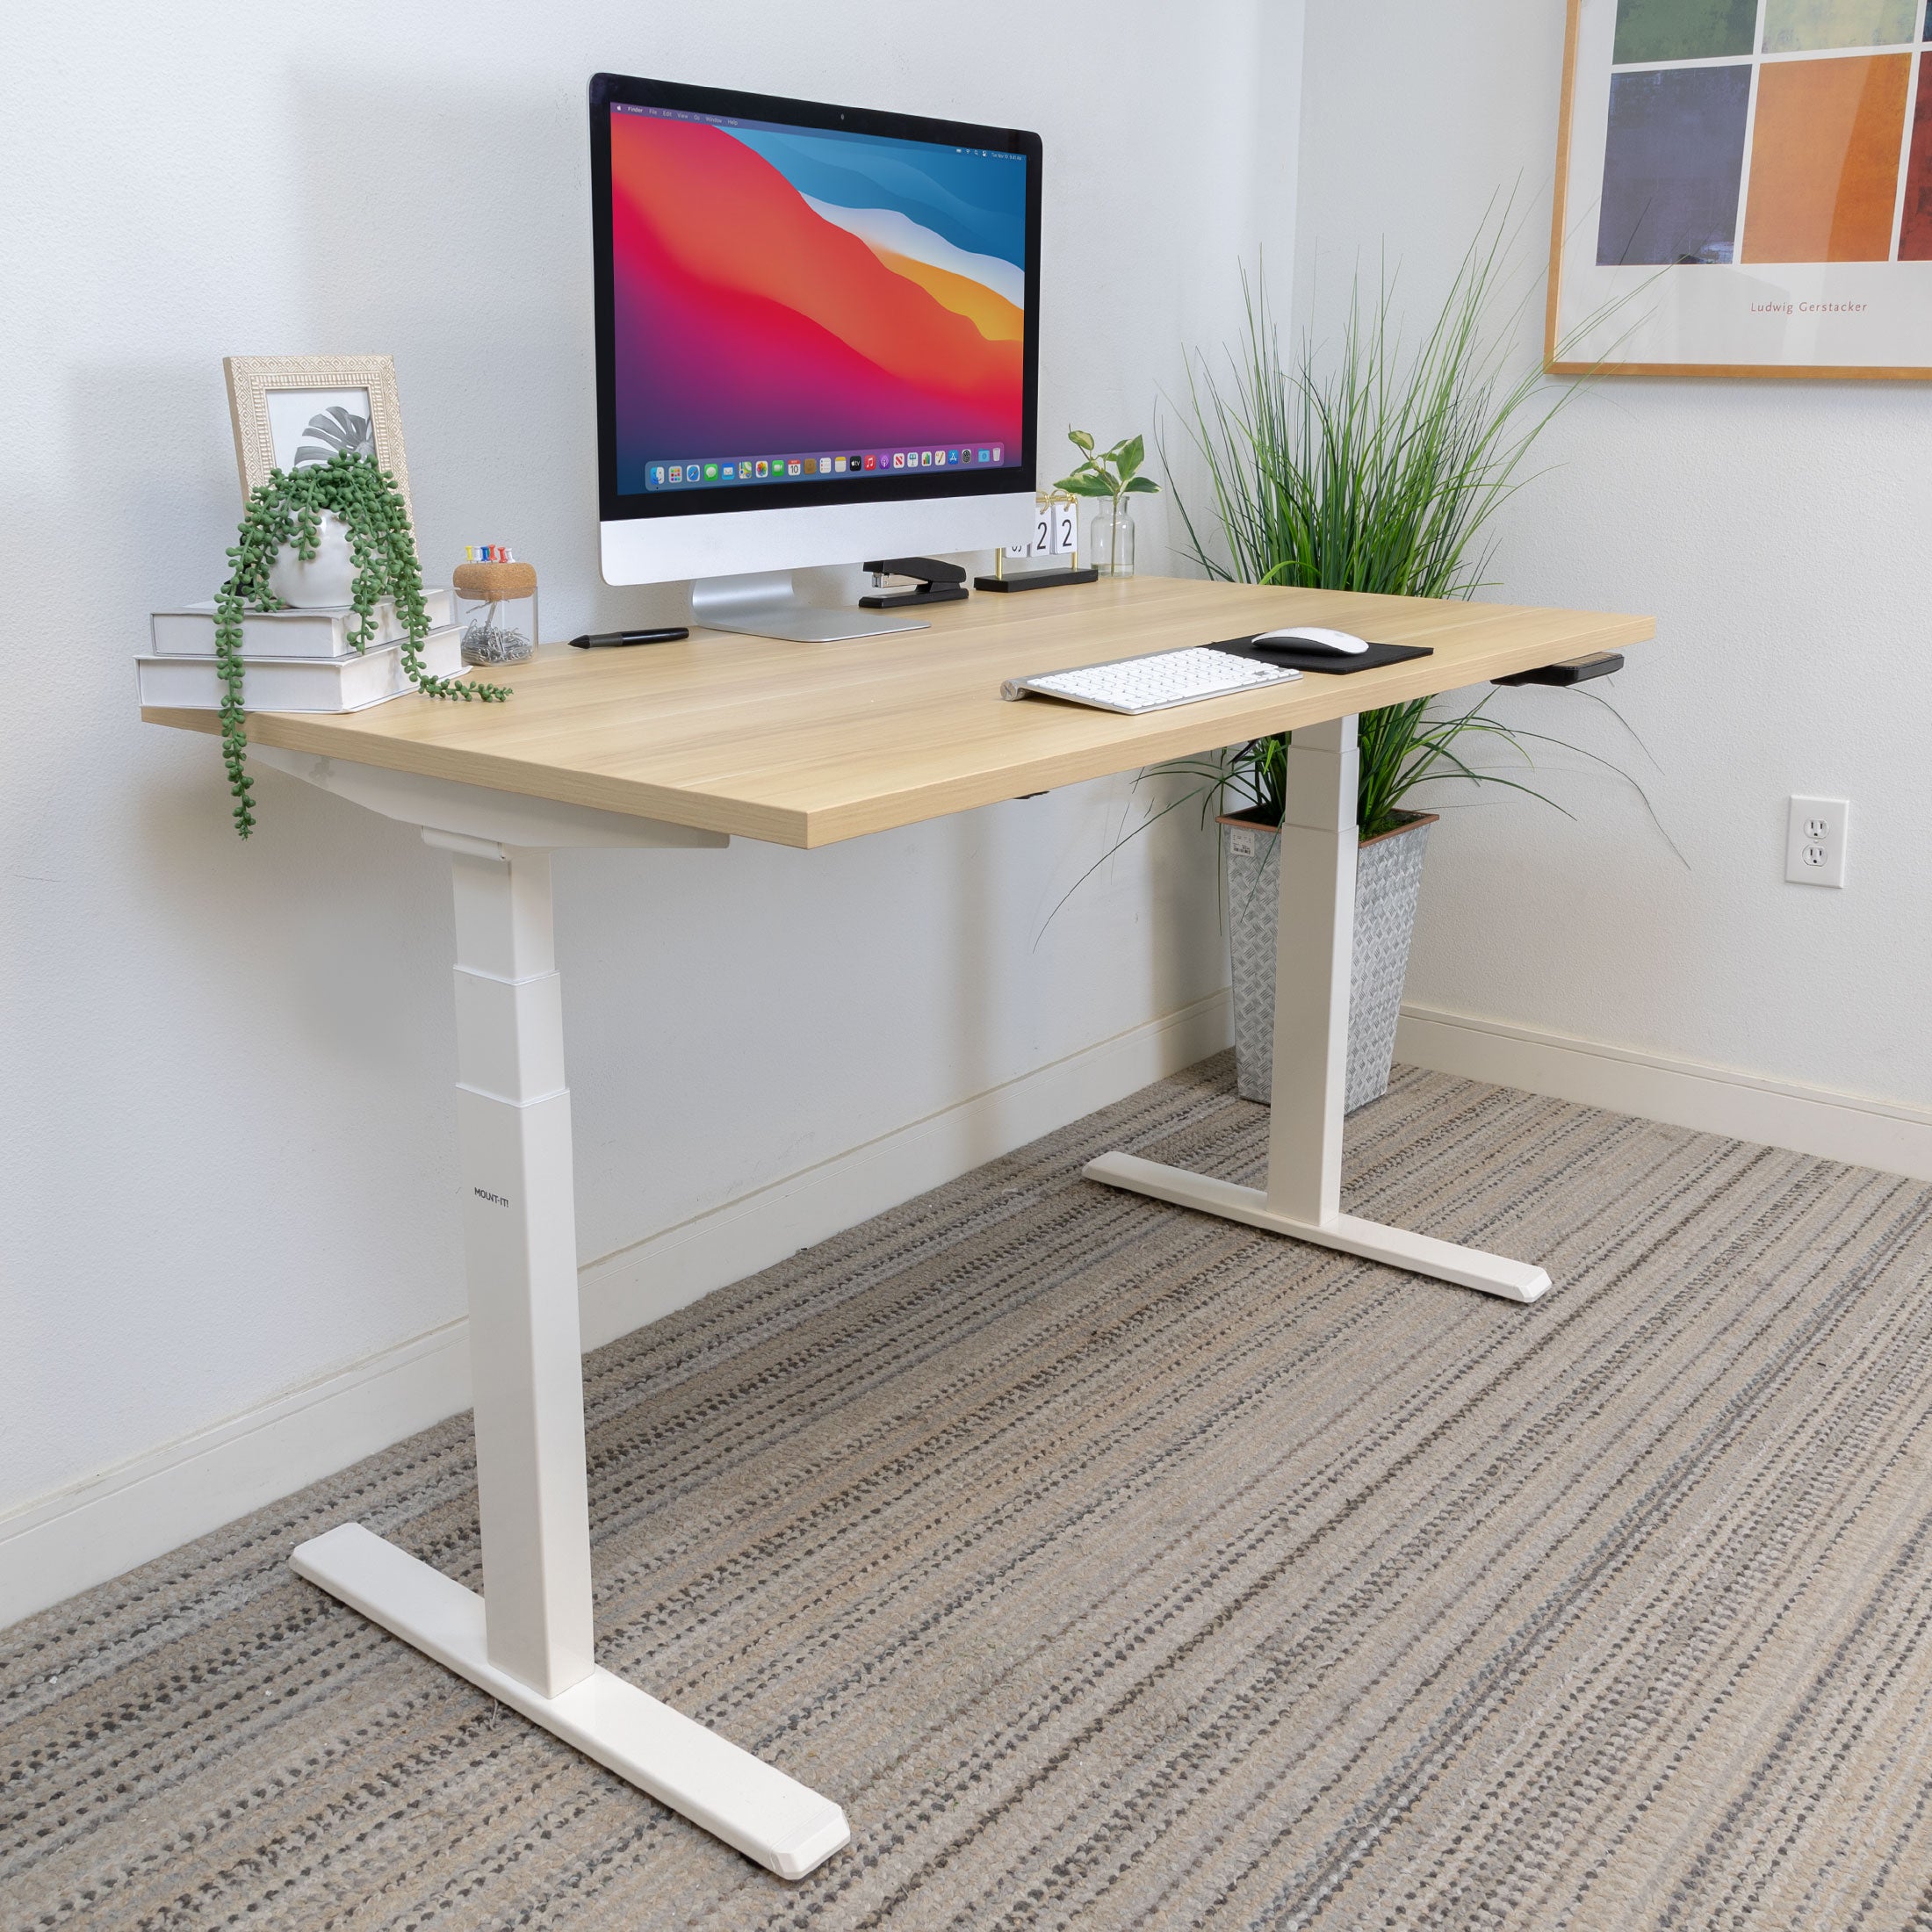 Ultimate Dual Motor Electric Standing Desk with 55" Tabletop